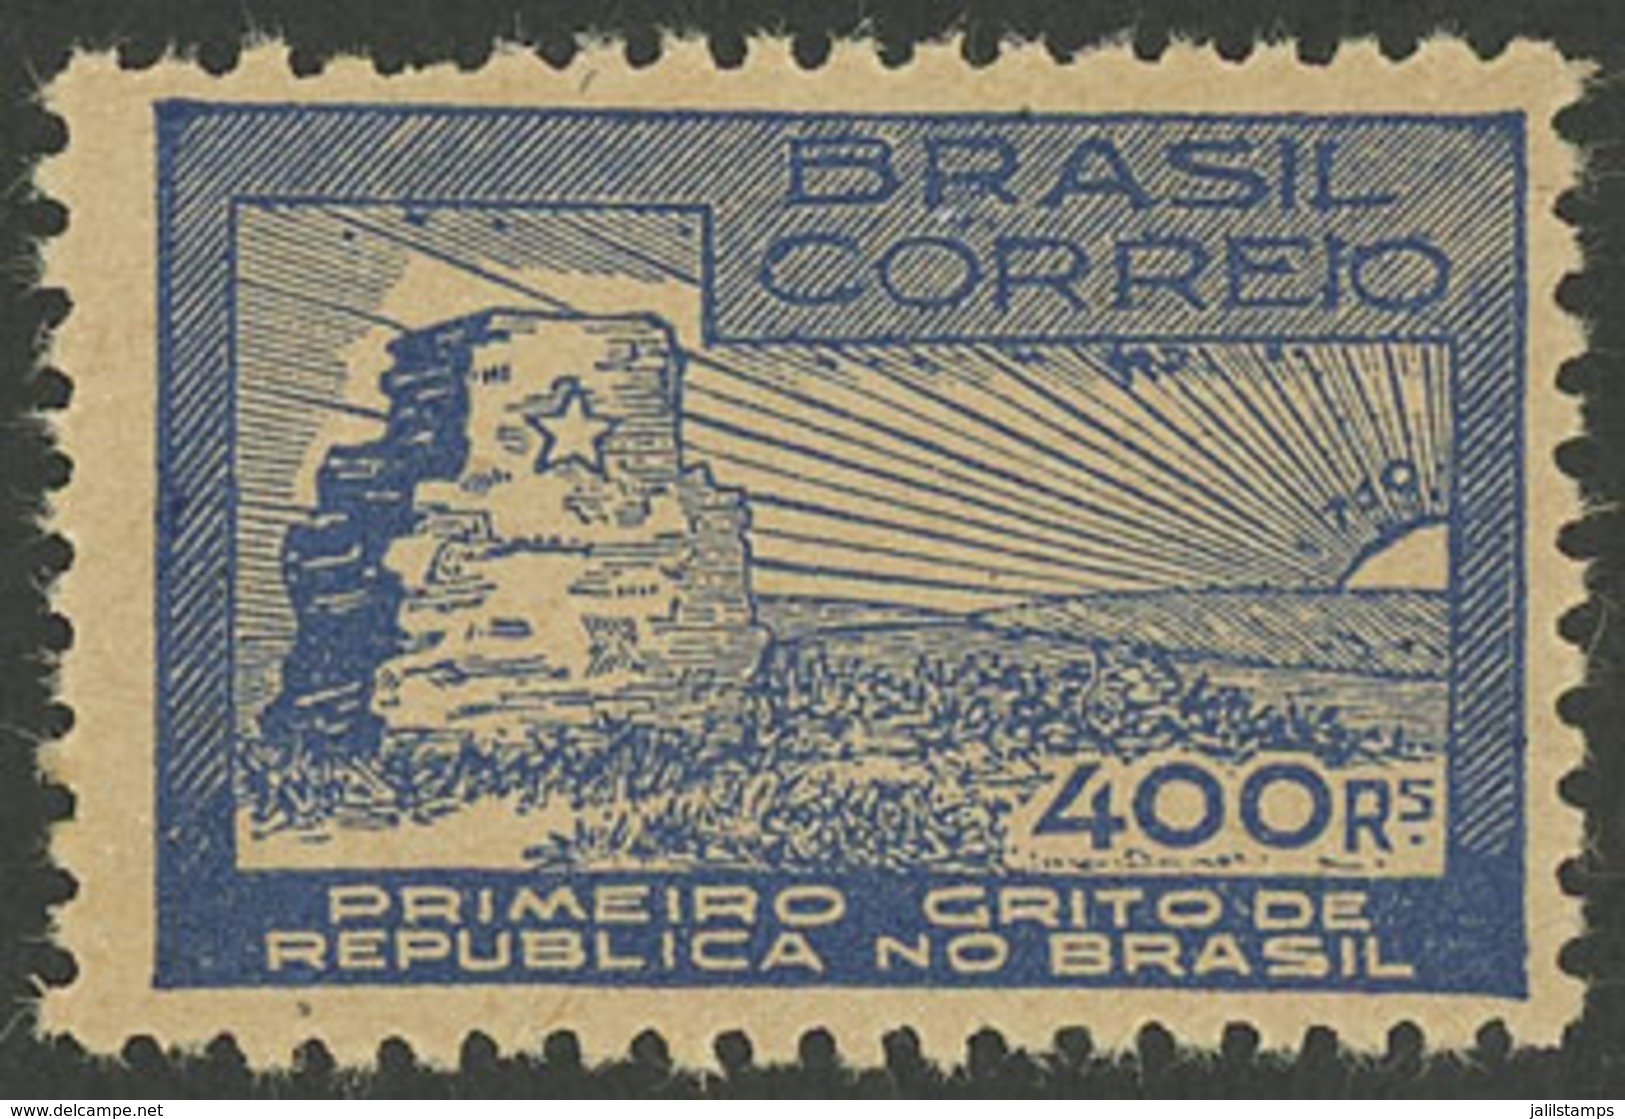 BRAZIL: RHM.C-129, 1938 Independence, PROOF Printed On Regular Unwatermarked Paper, VF Quality! - Lettres & Documents